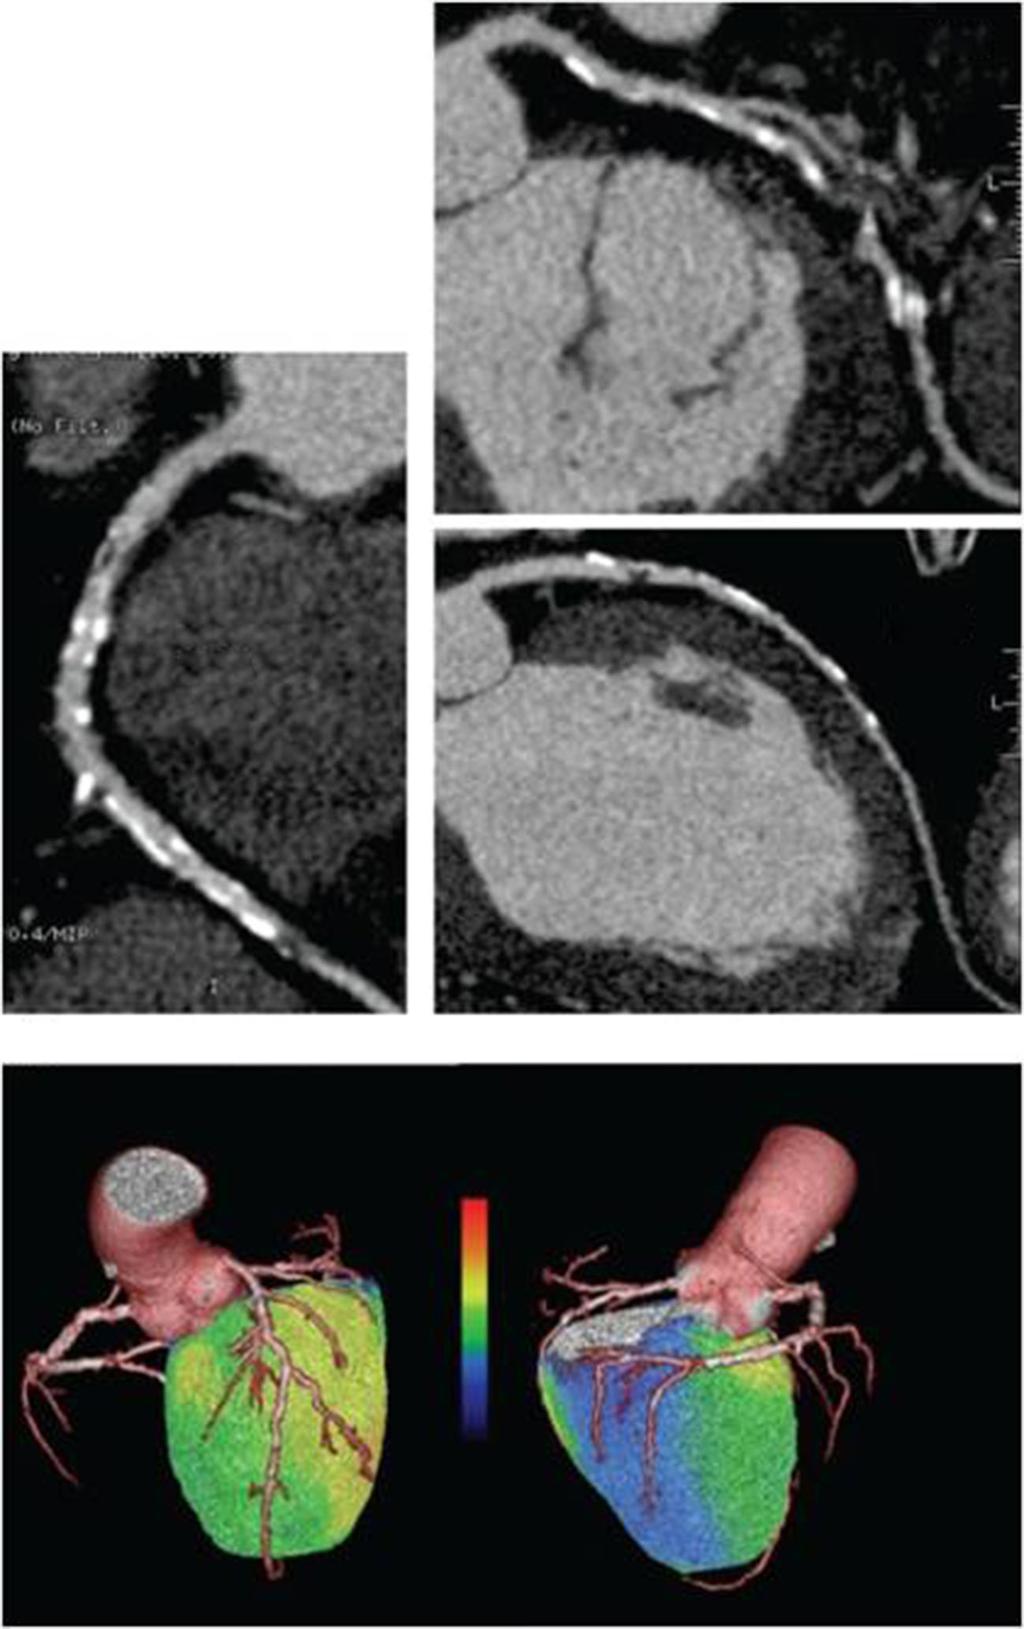 Cardiovascular Diagnosis and Therapy, Vol 7, No April 7 9 A LCX RCA LAD B Anterior view Posterior view Figure Hybrid PET/CT allows non-invasive evaluation of the coronary anatomy and functional